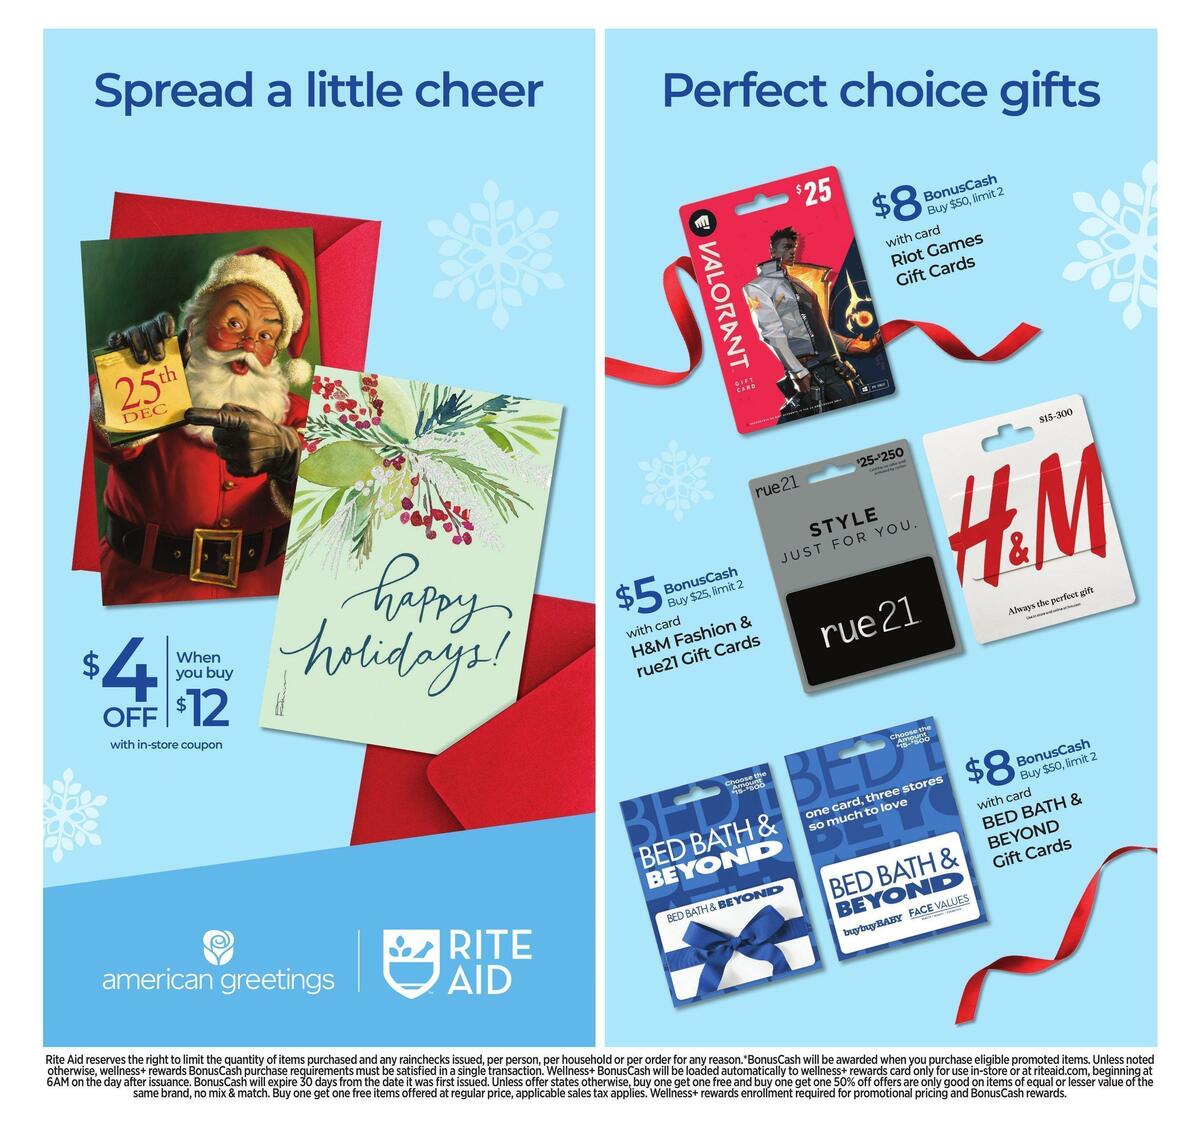 Rite Aid Weekly Ad from December 12